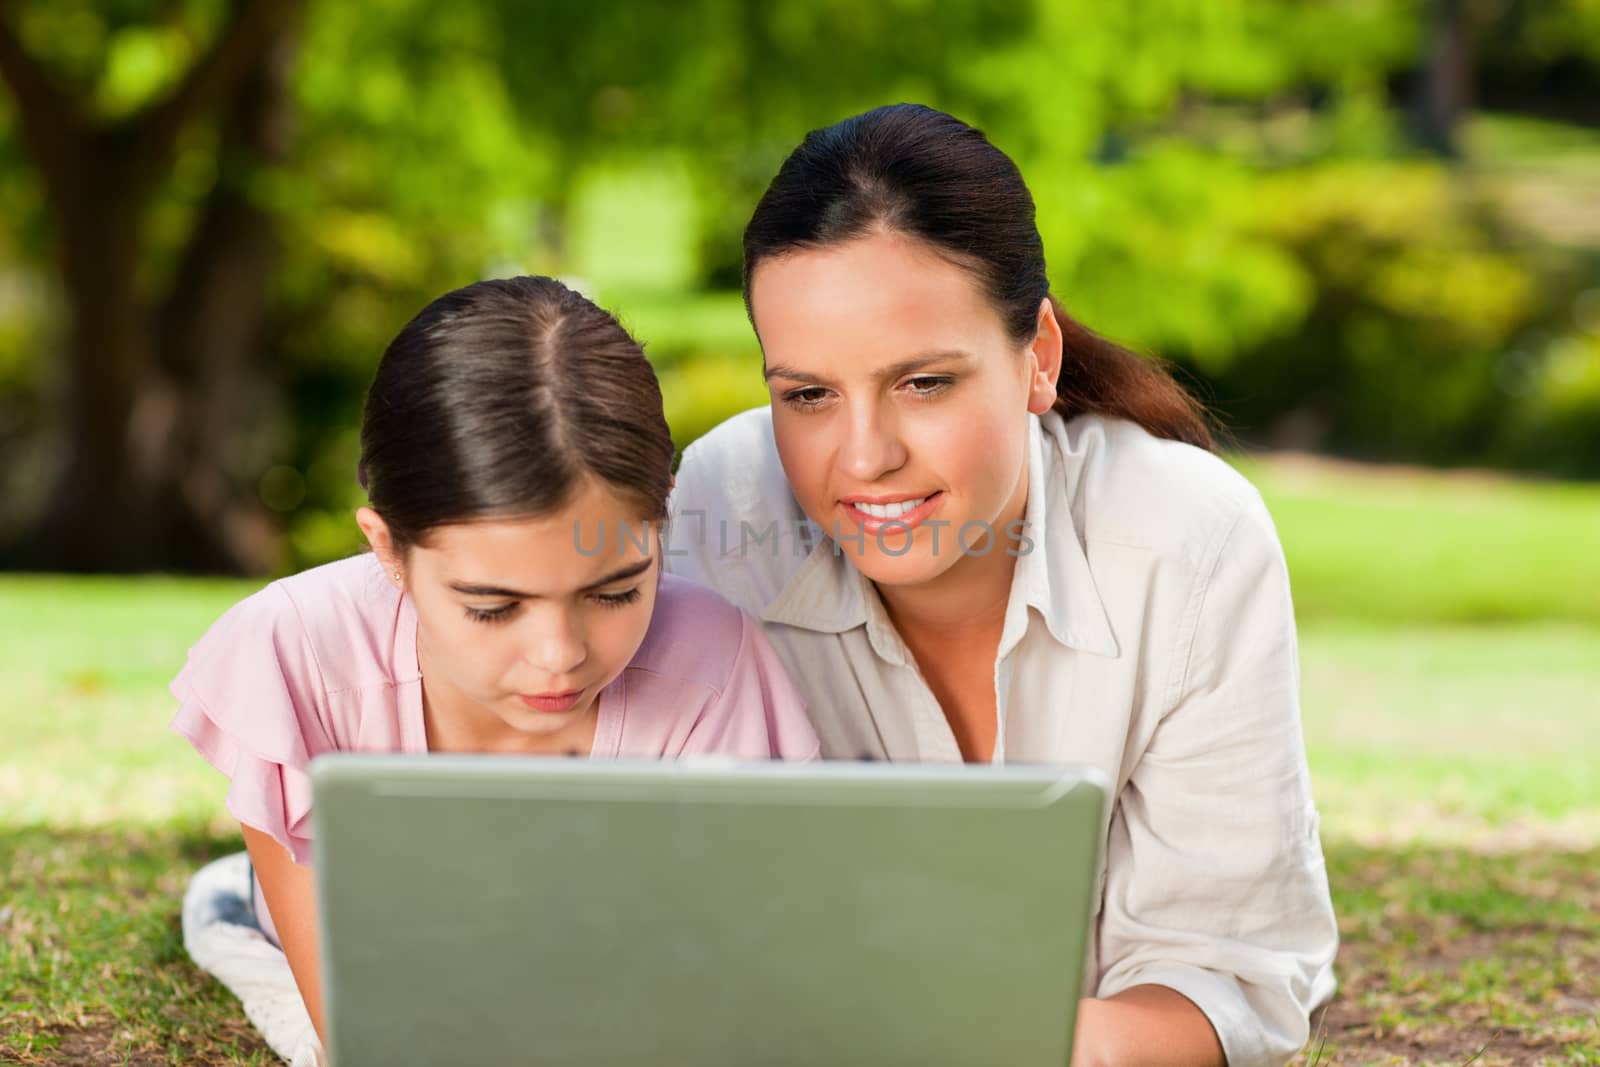 Mother and her daughter looking at their laptop during the summer